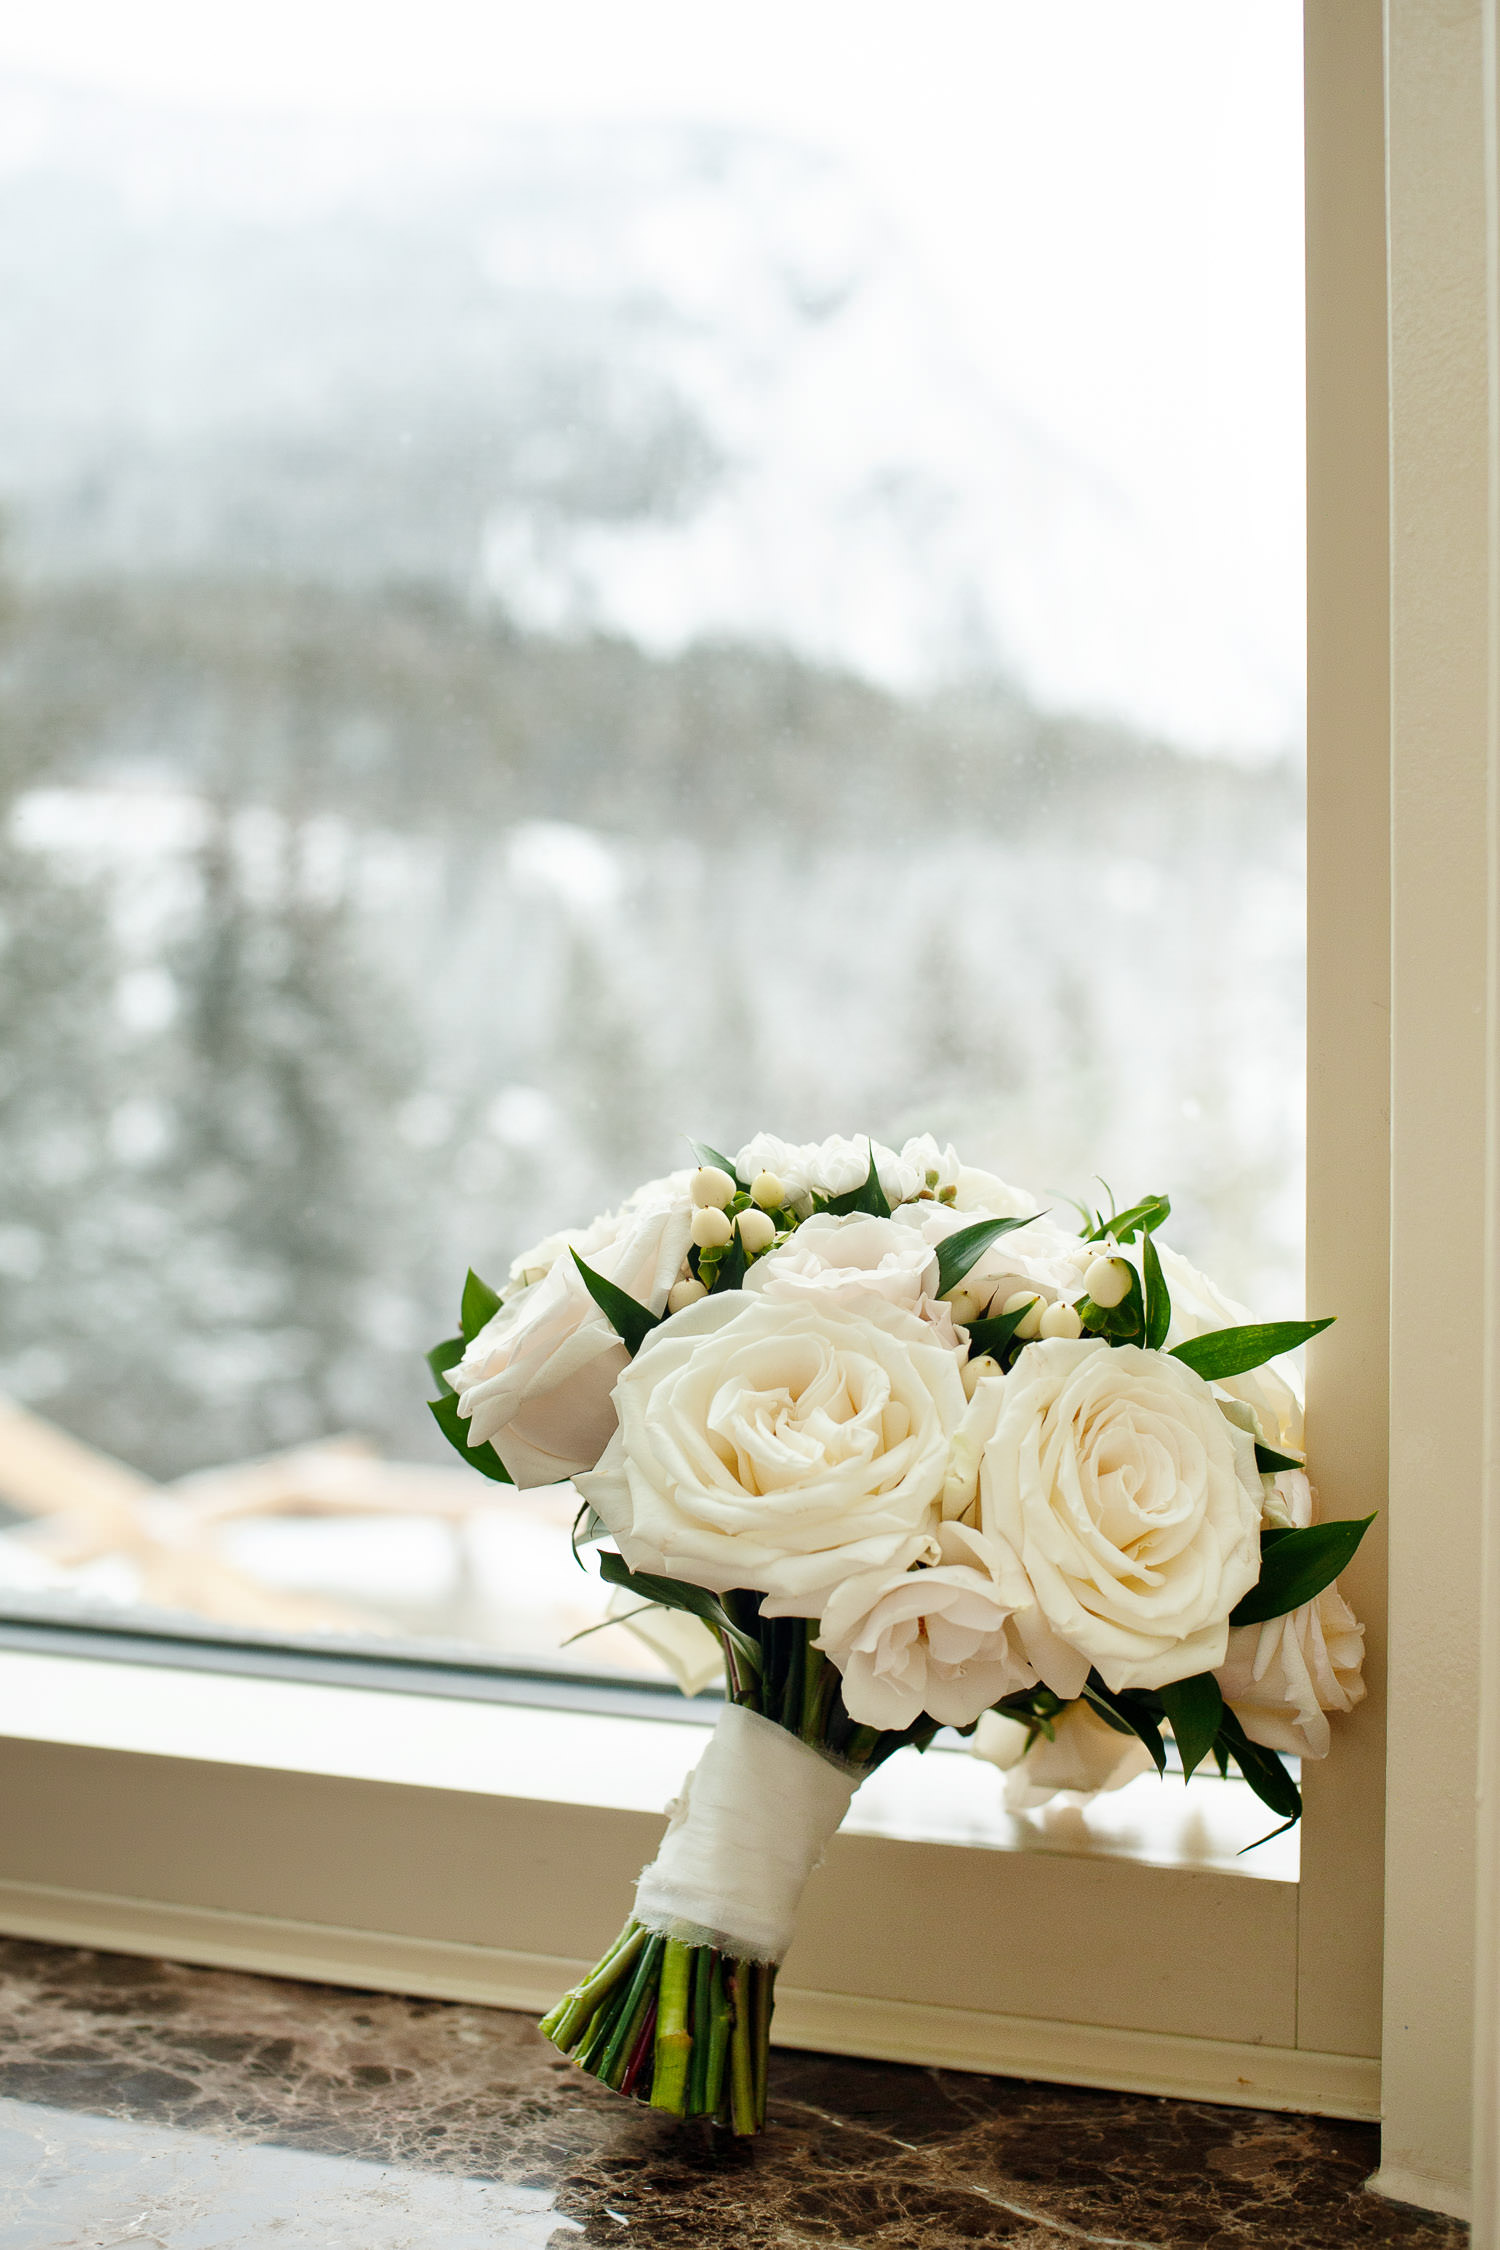 Winter bridal bouquet from Flowers by Janie captured by Tara Whittaker Photography